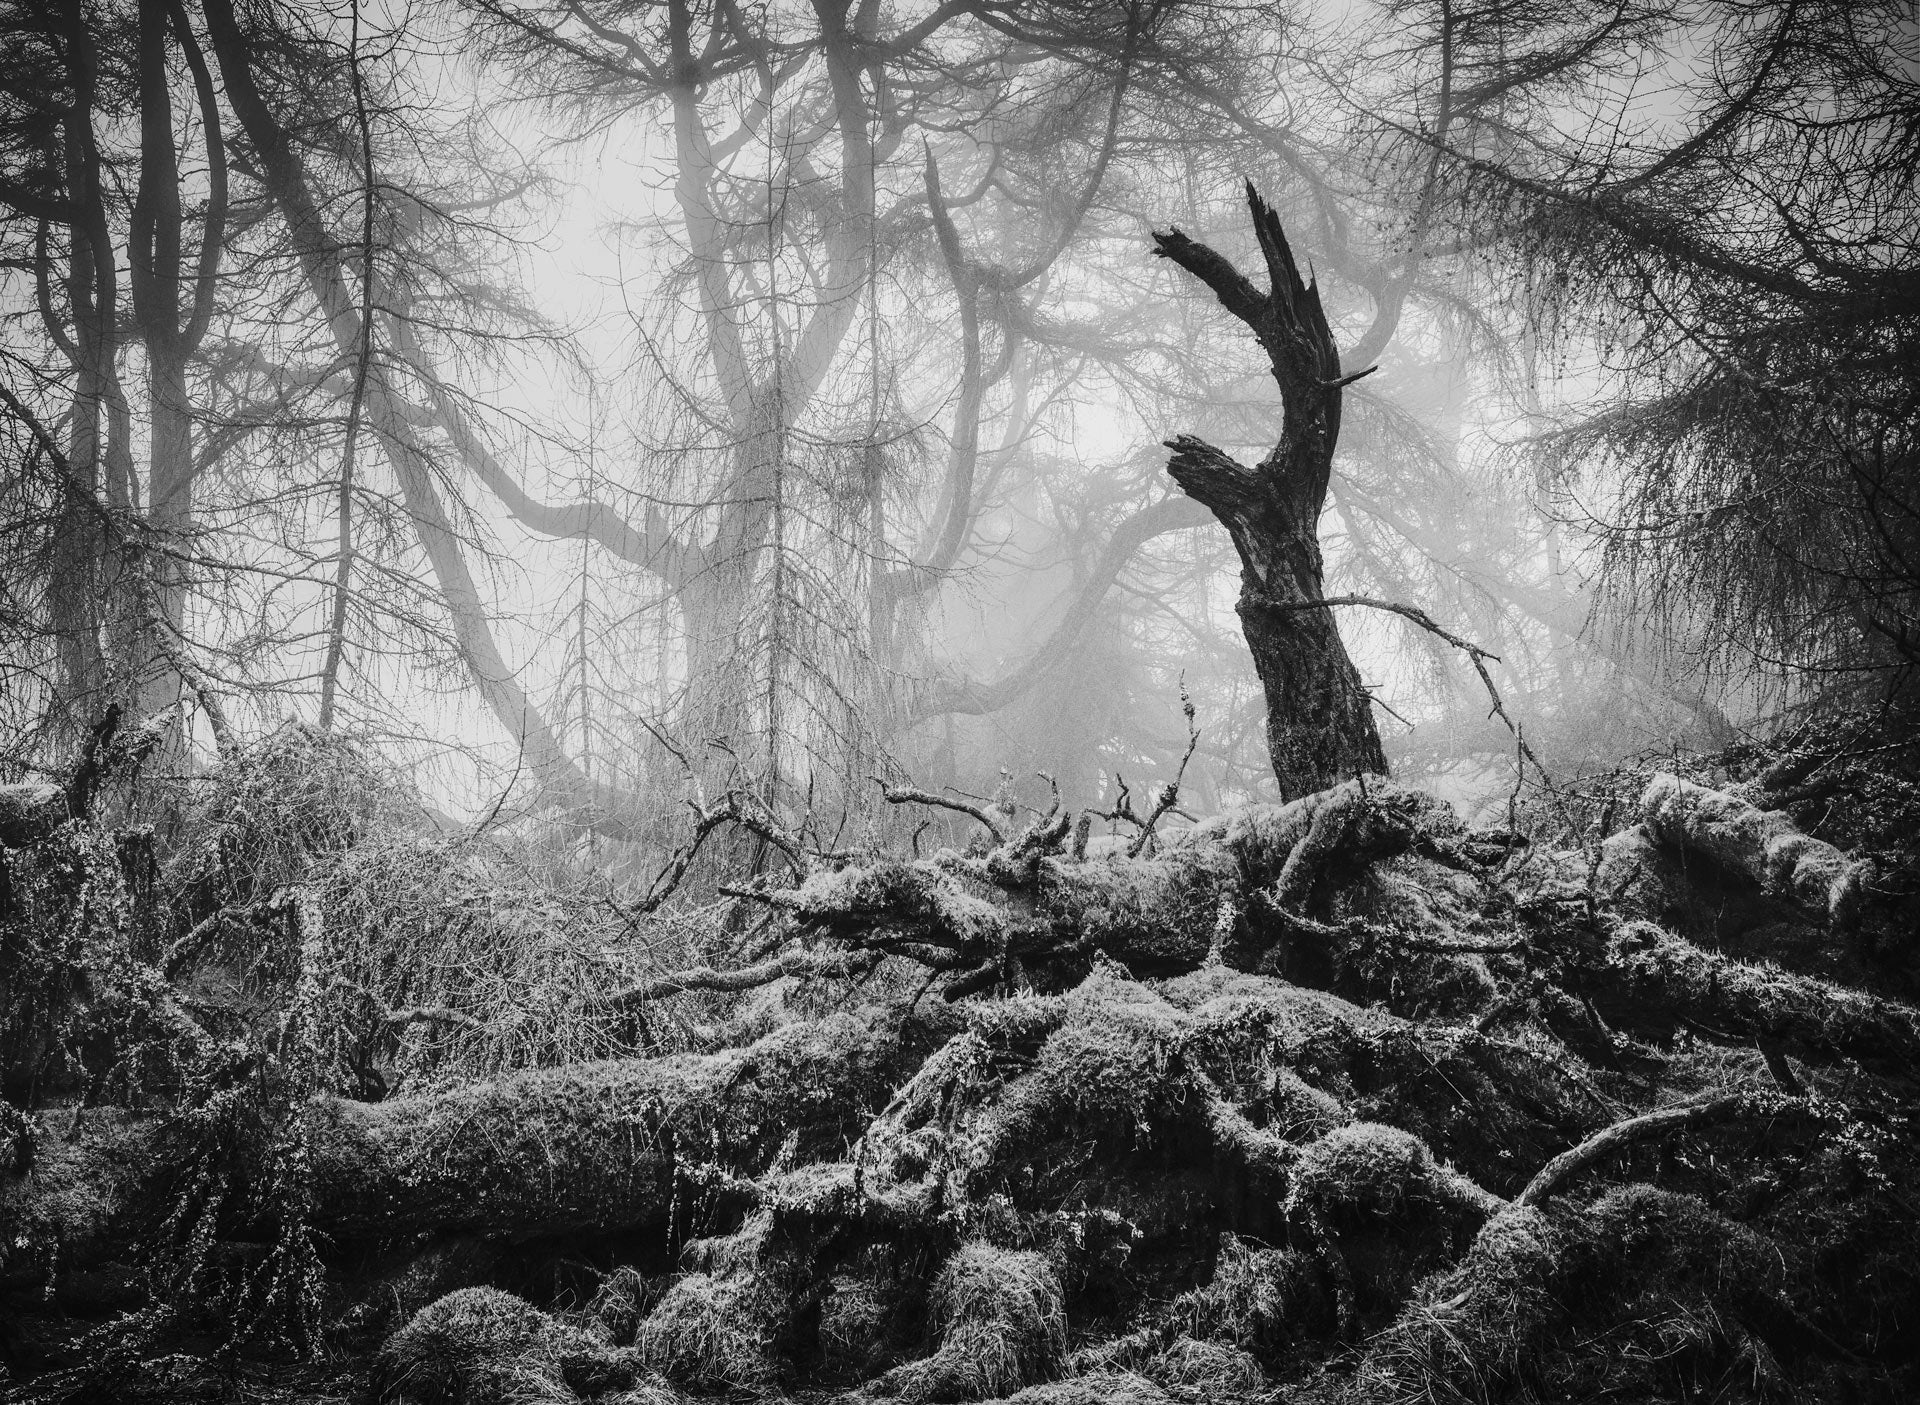 Gnarled branches in England's Lake District. (Photo: Matthew Turner)